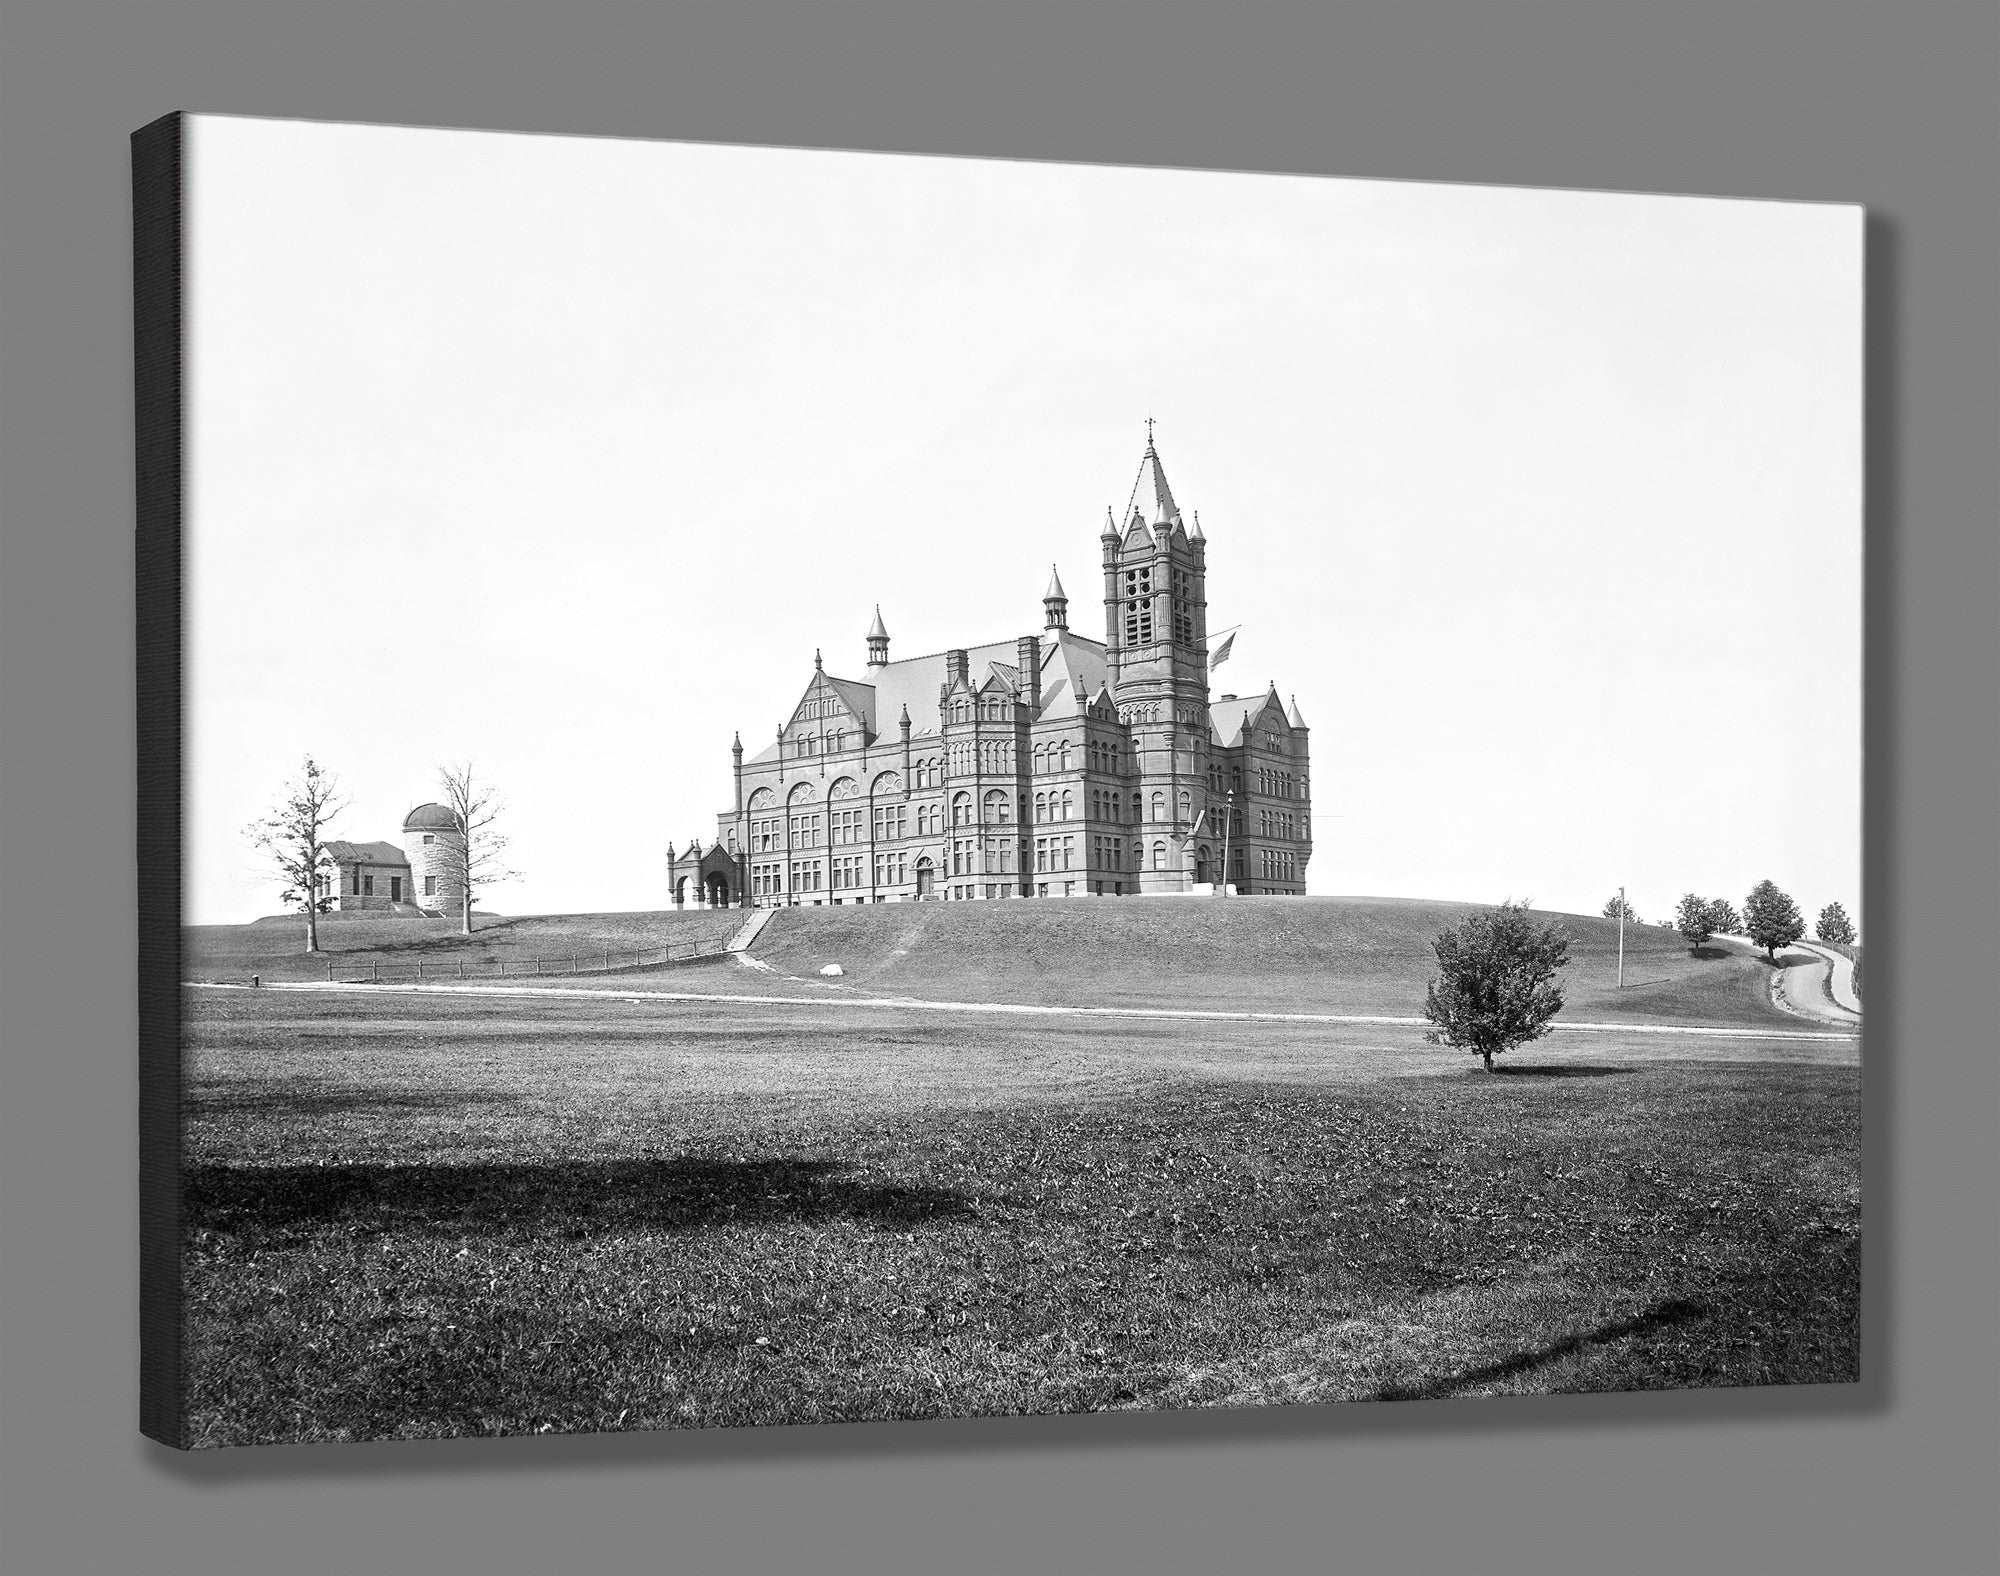 A canvas print reproduction of a vintage photograph of J Crouse Hall at Syracuse University